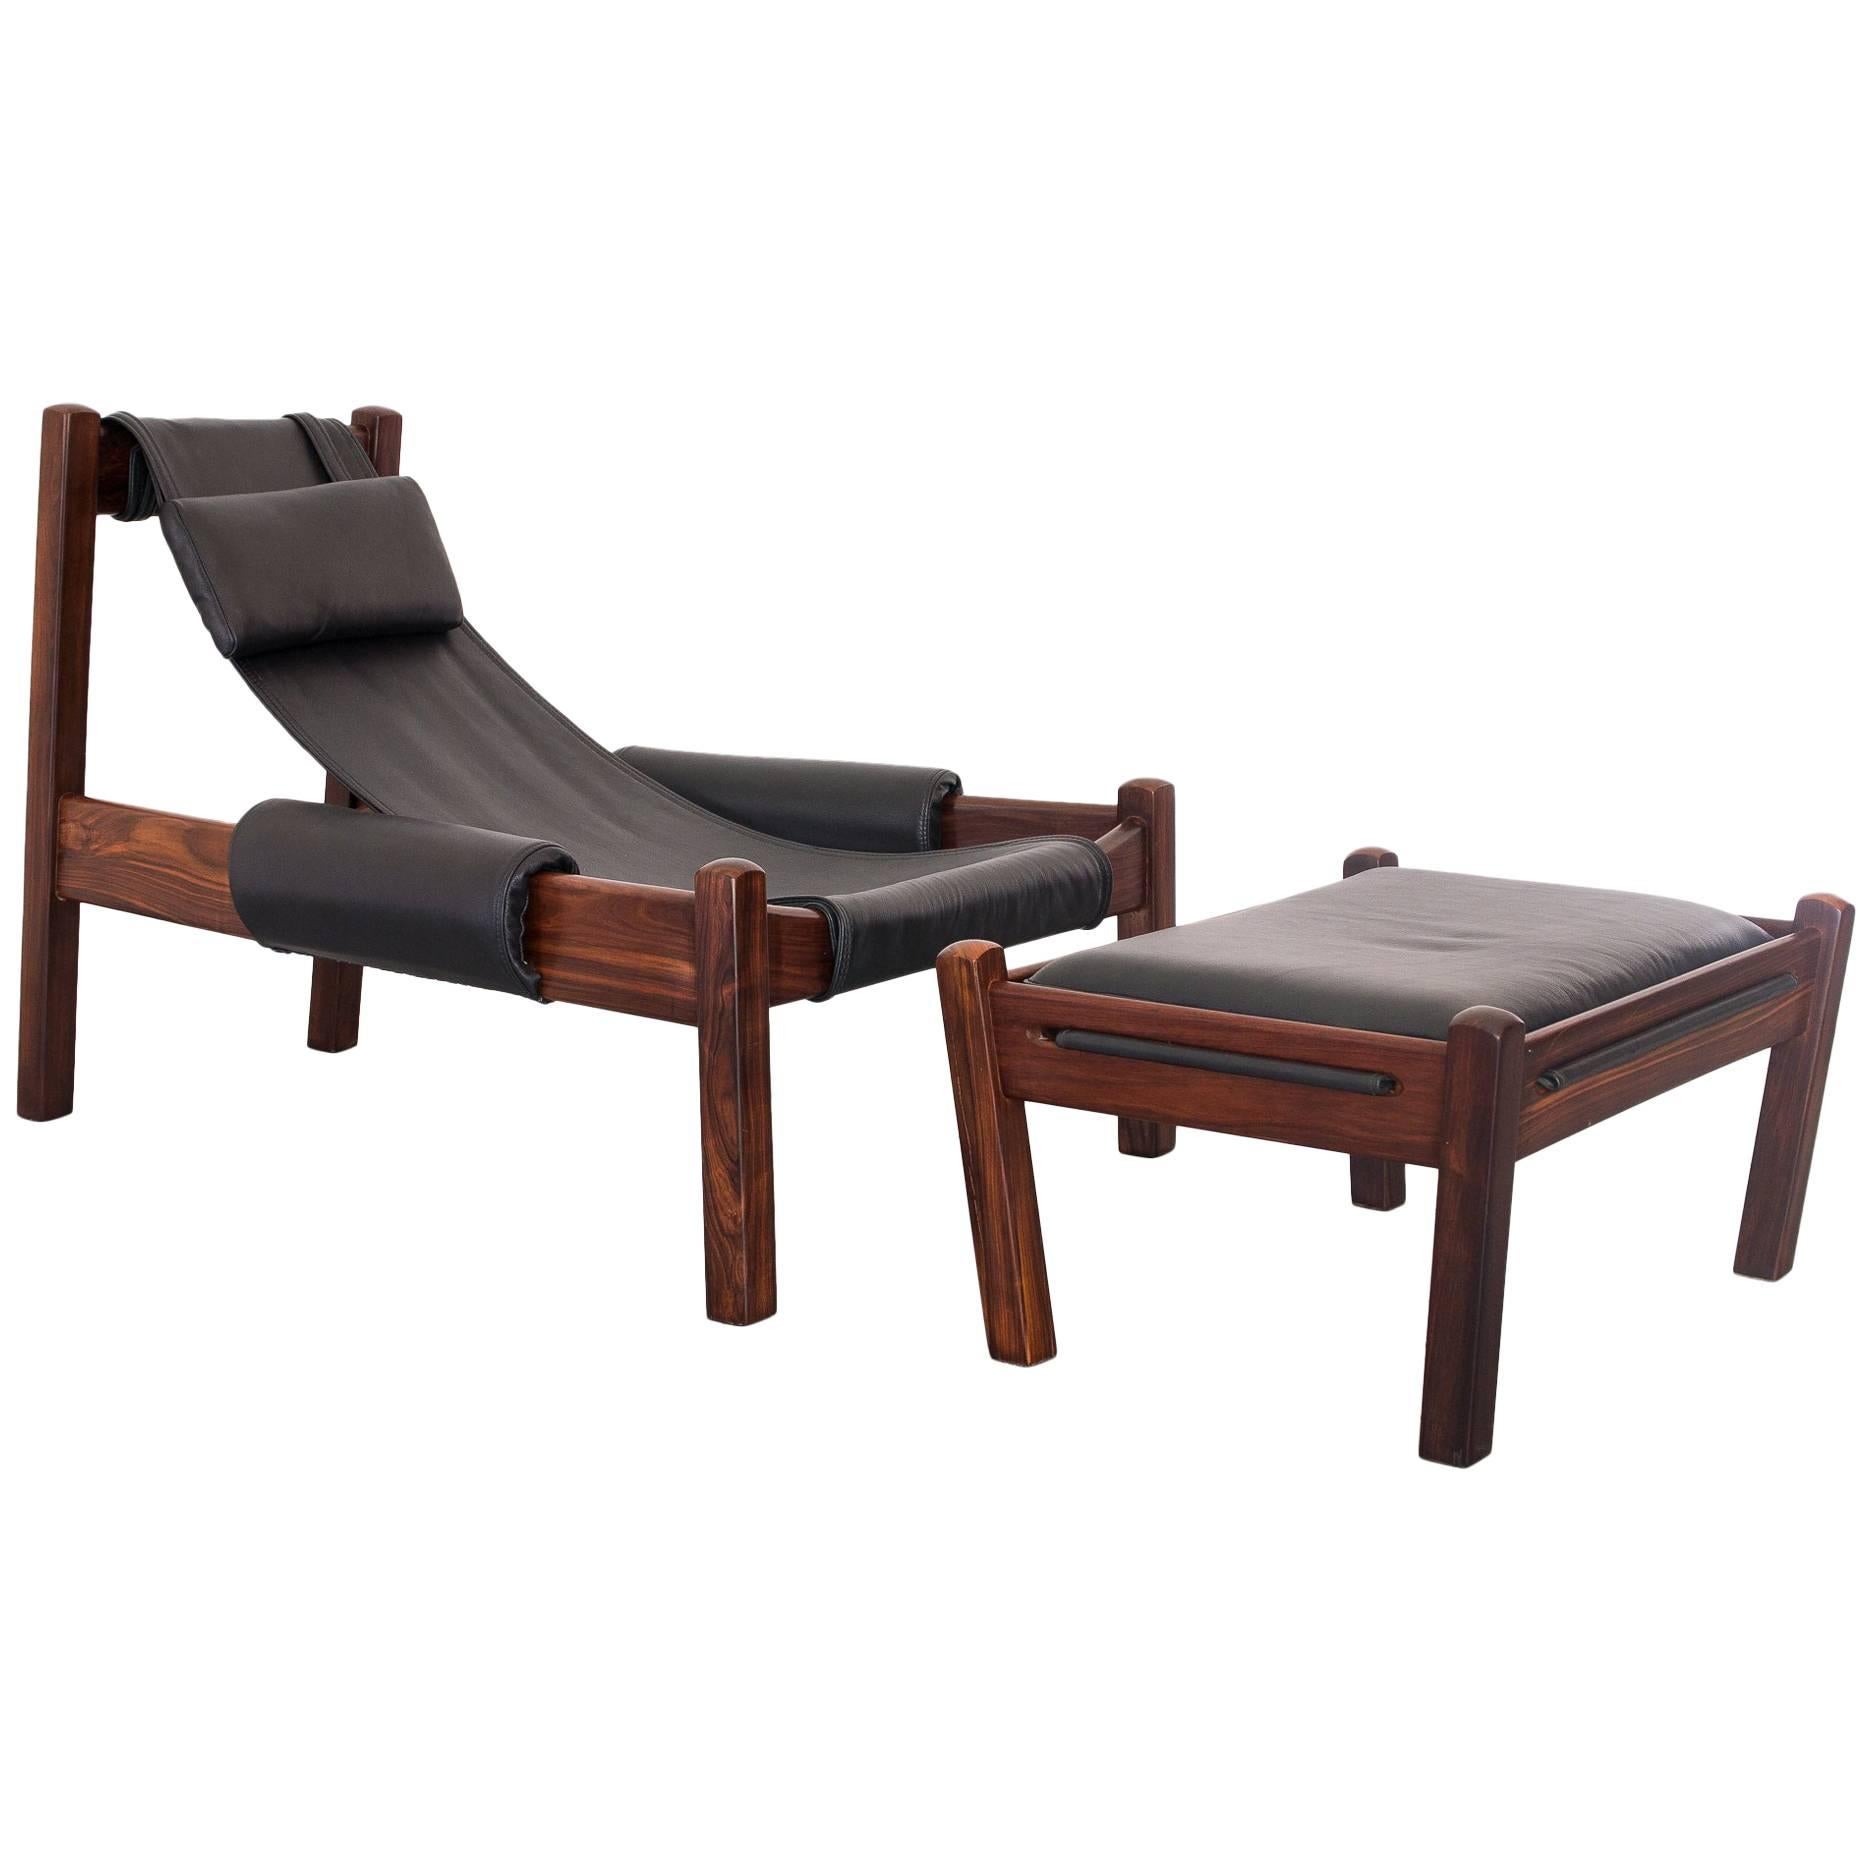 1960s "Poltronatus" Lounge Chair with Ottoman in Rosewood and Leather, Brazil